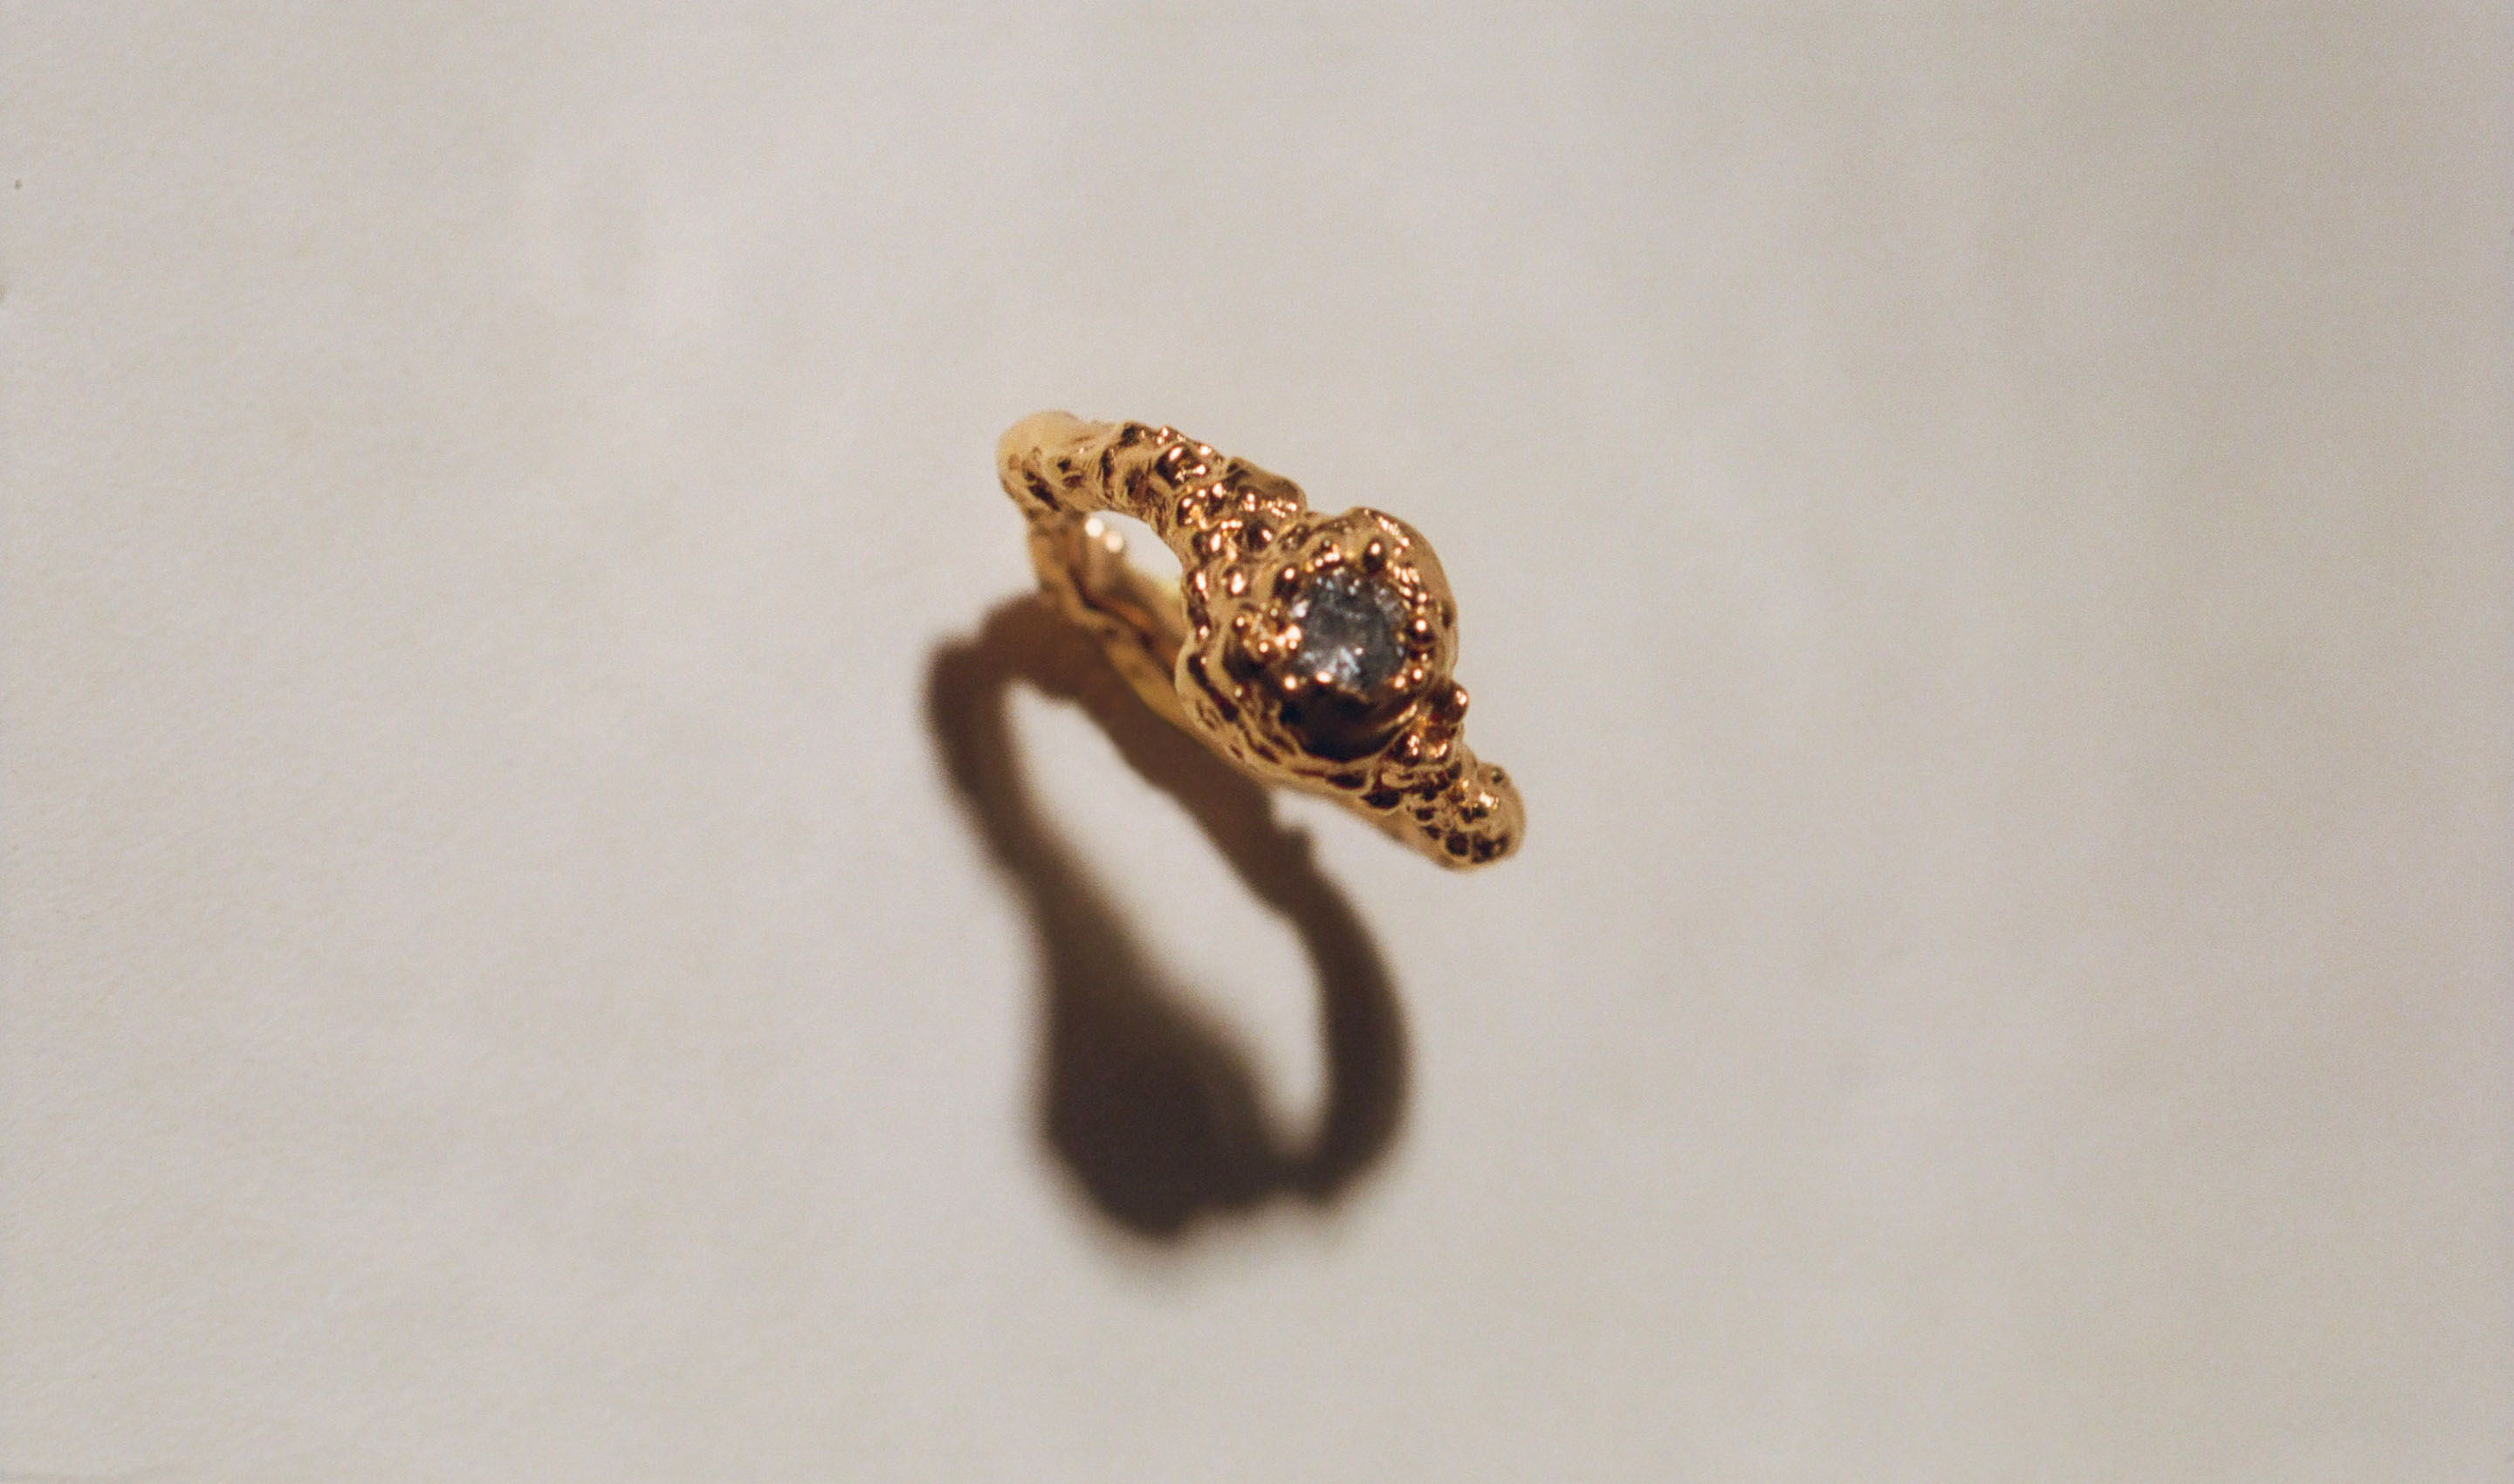 Diamond and solid gold engagement ring by Alighieri. 